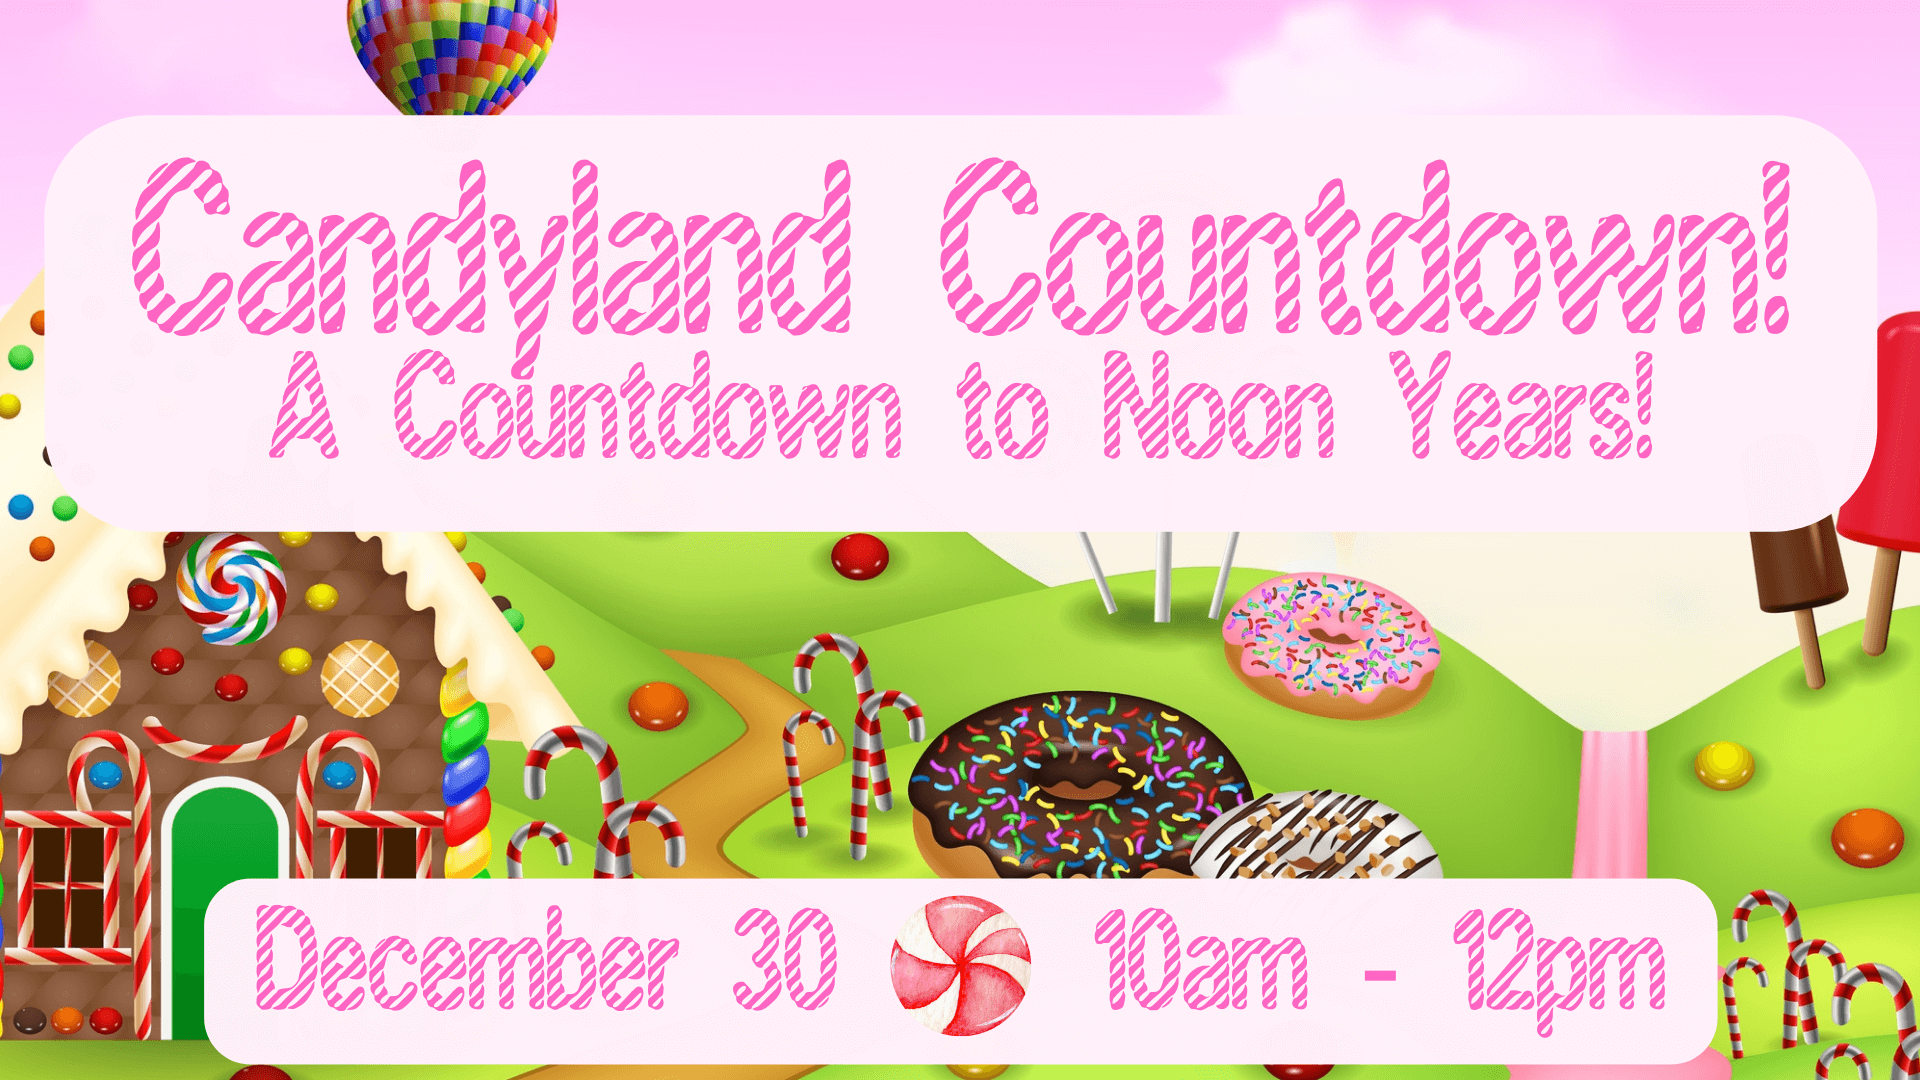 Candyland Countdown! Countdown to New Years Dec 30 10am-12pm